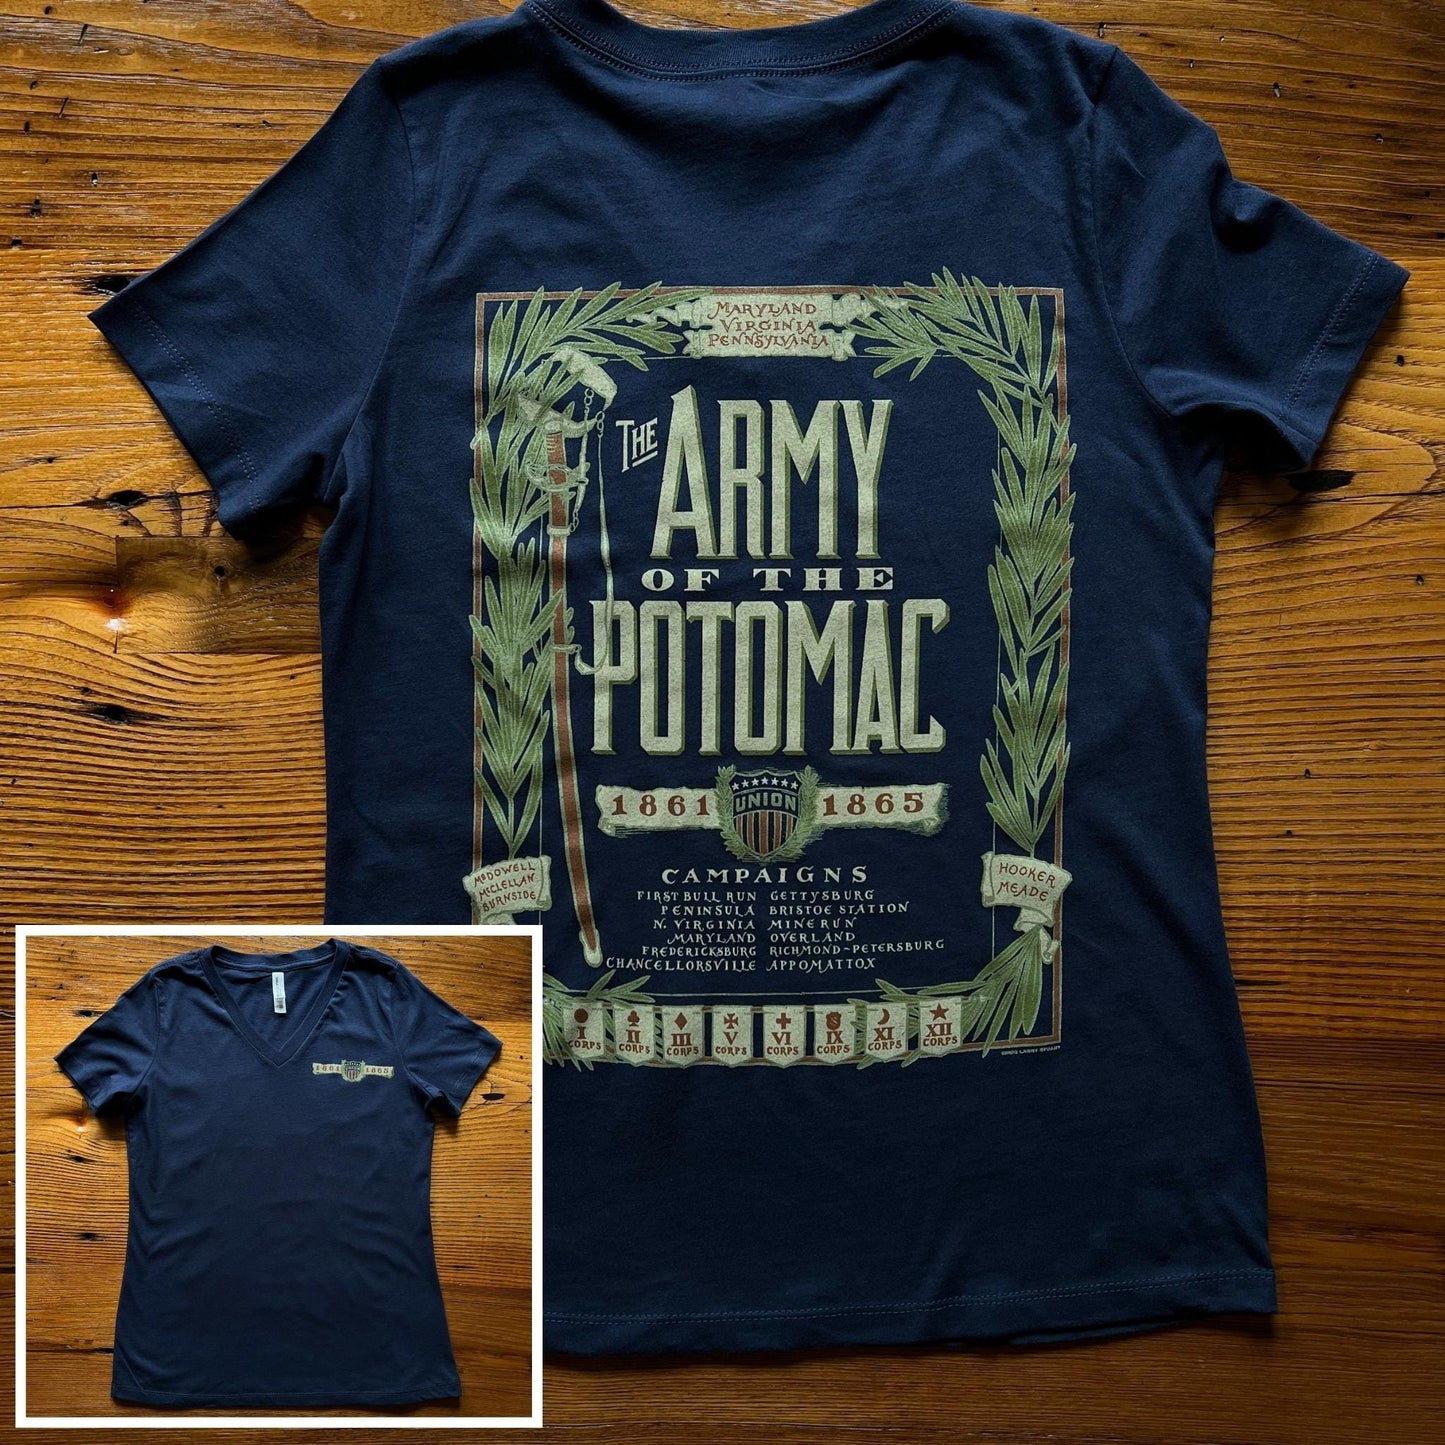 "The Army of the Potomac" Women's V-neck shirt from The History List store